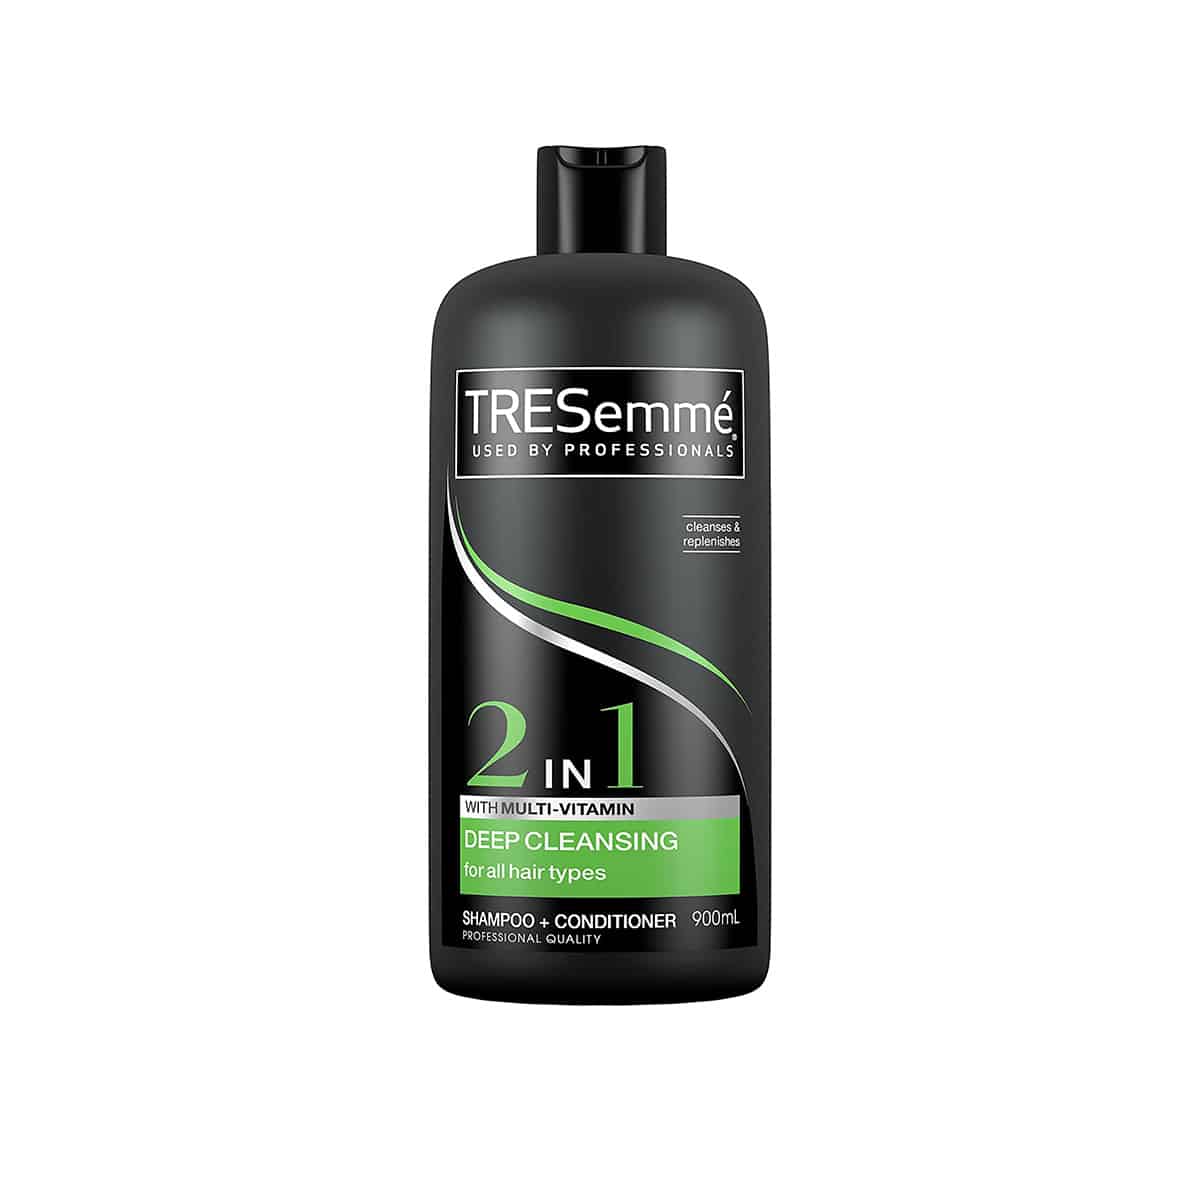 Tresemmé Deep Cleansing 2 In 1 Shampoo And Conditioner 900ml I Scent 5044